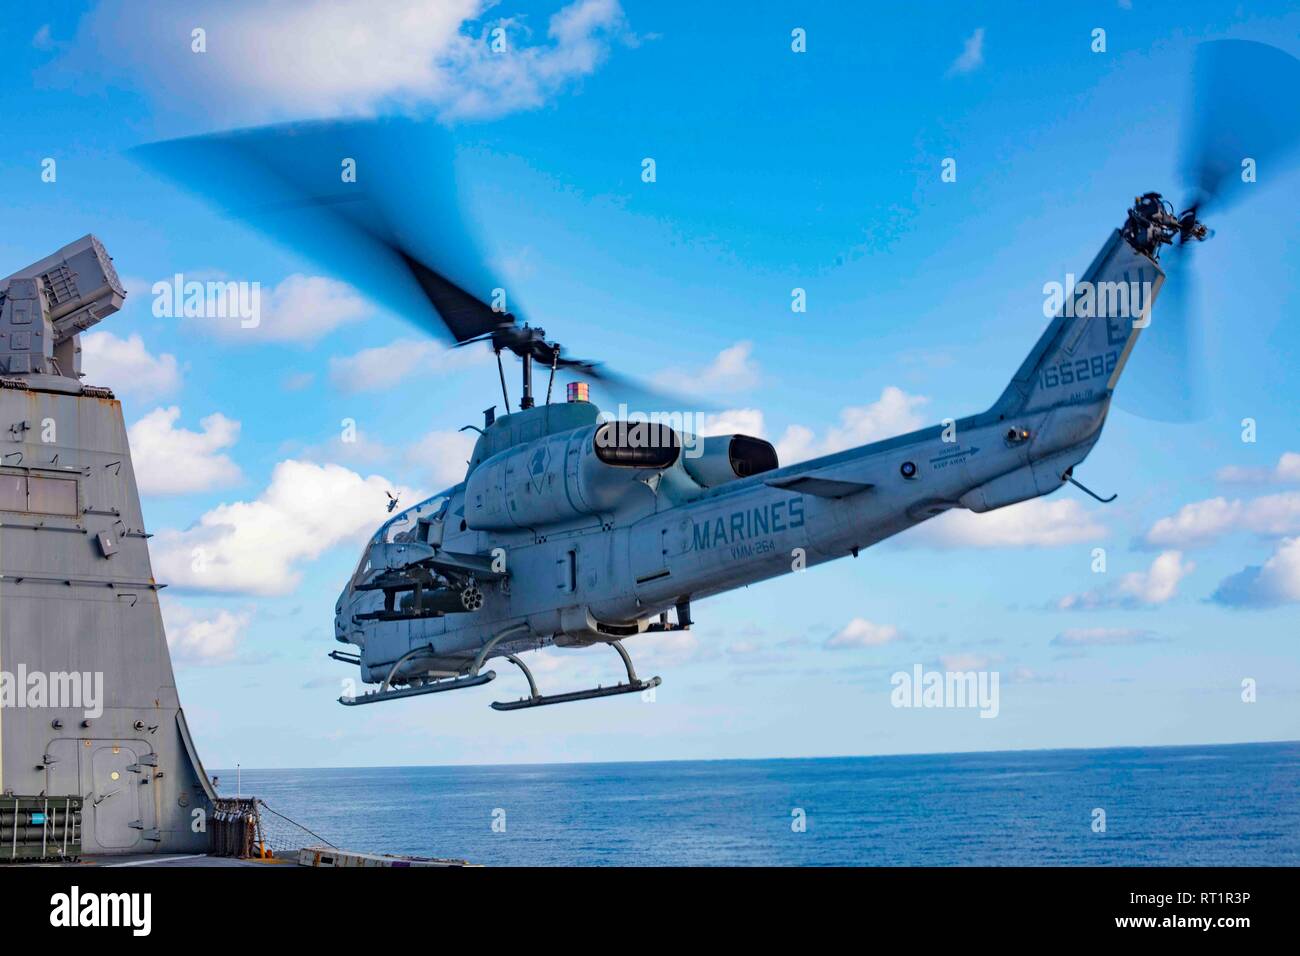 190221-N-HG389-0015 MEDITERRANEAN SEA (Feb. 21, 2019) An AH-1W Super Cobra helicopter assigned to the “Black Knights” of Marine Medium Tiltrotor Squadron (VMM) 264 (Reinforced) departs the flight deck of the San Antonio-class amphibious transport dock ship USS Arlington (LPD 24), Feb. 21, 2019. Arlington is on a scheduled deployment as part of the Kearsarge Amphibious Ready Group in support of maritime security operations, crisis response and theater security cooperation, while also providing a forward naval presence. (U.S. Navy photo by Mass Communication Specialist 2nd Class Brandon Parker/R Stock Photo